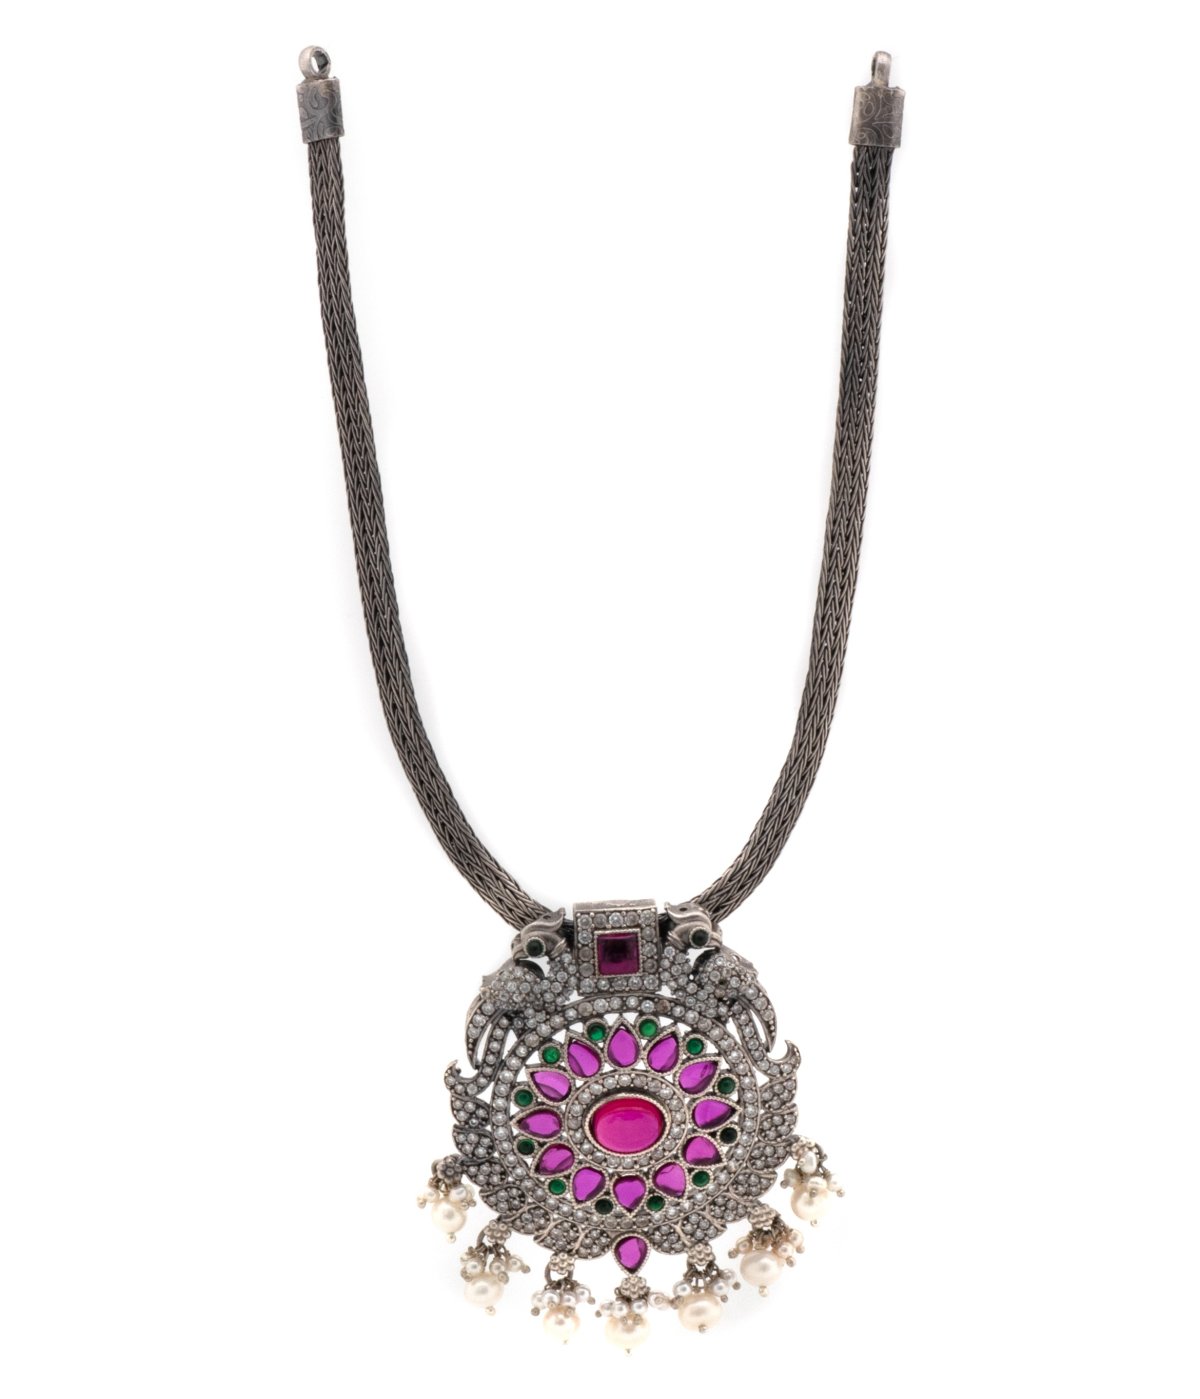  Set of Toned Maroon Silver Oxidised Necklace